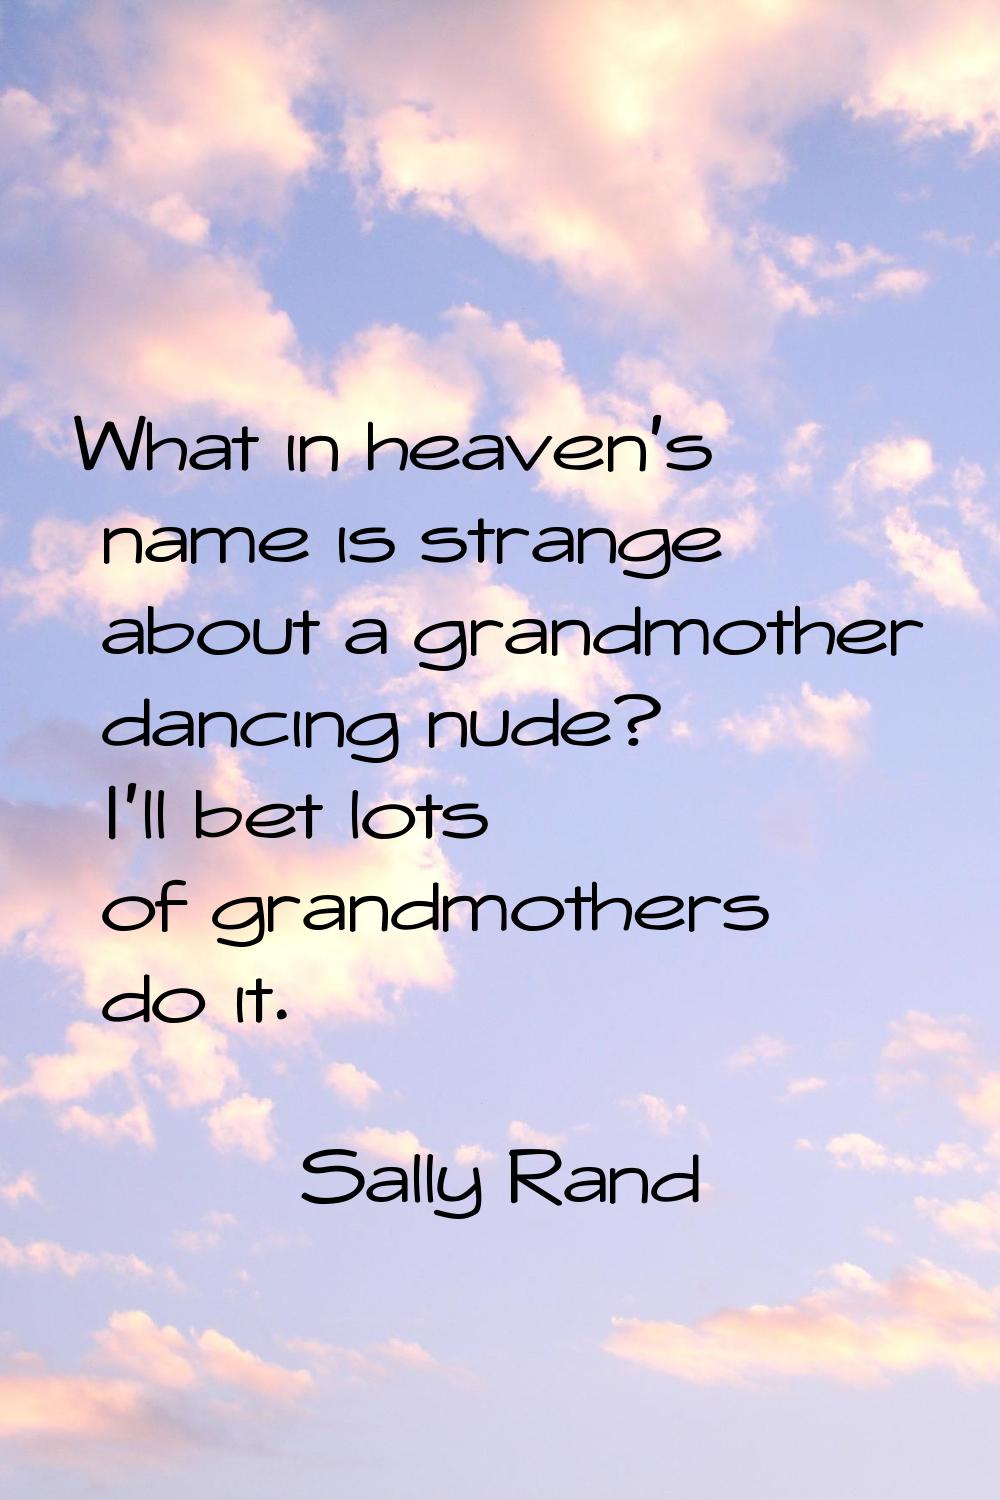 What in heaven's name is strange about a grandmother dancing nude? I'll bet lots of grandmothers do